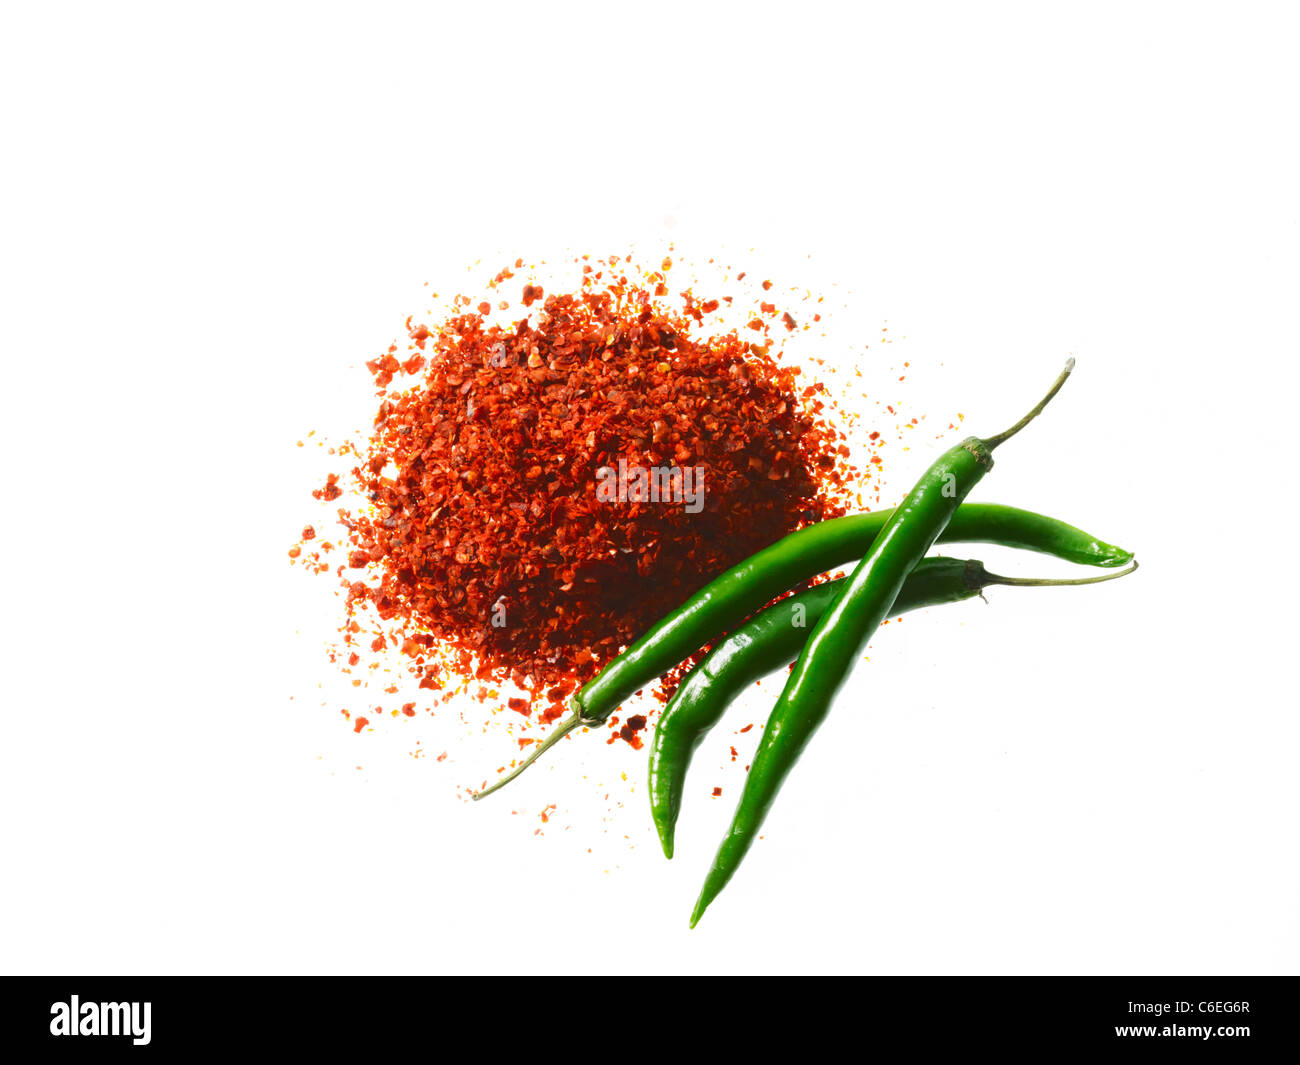 Studio shot of Red Chili Powder and Whole Green Chilies on white background Stock Photo